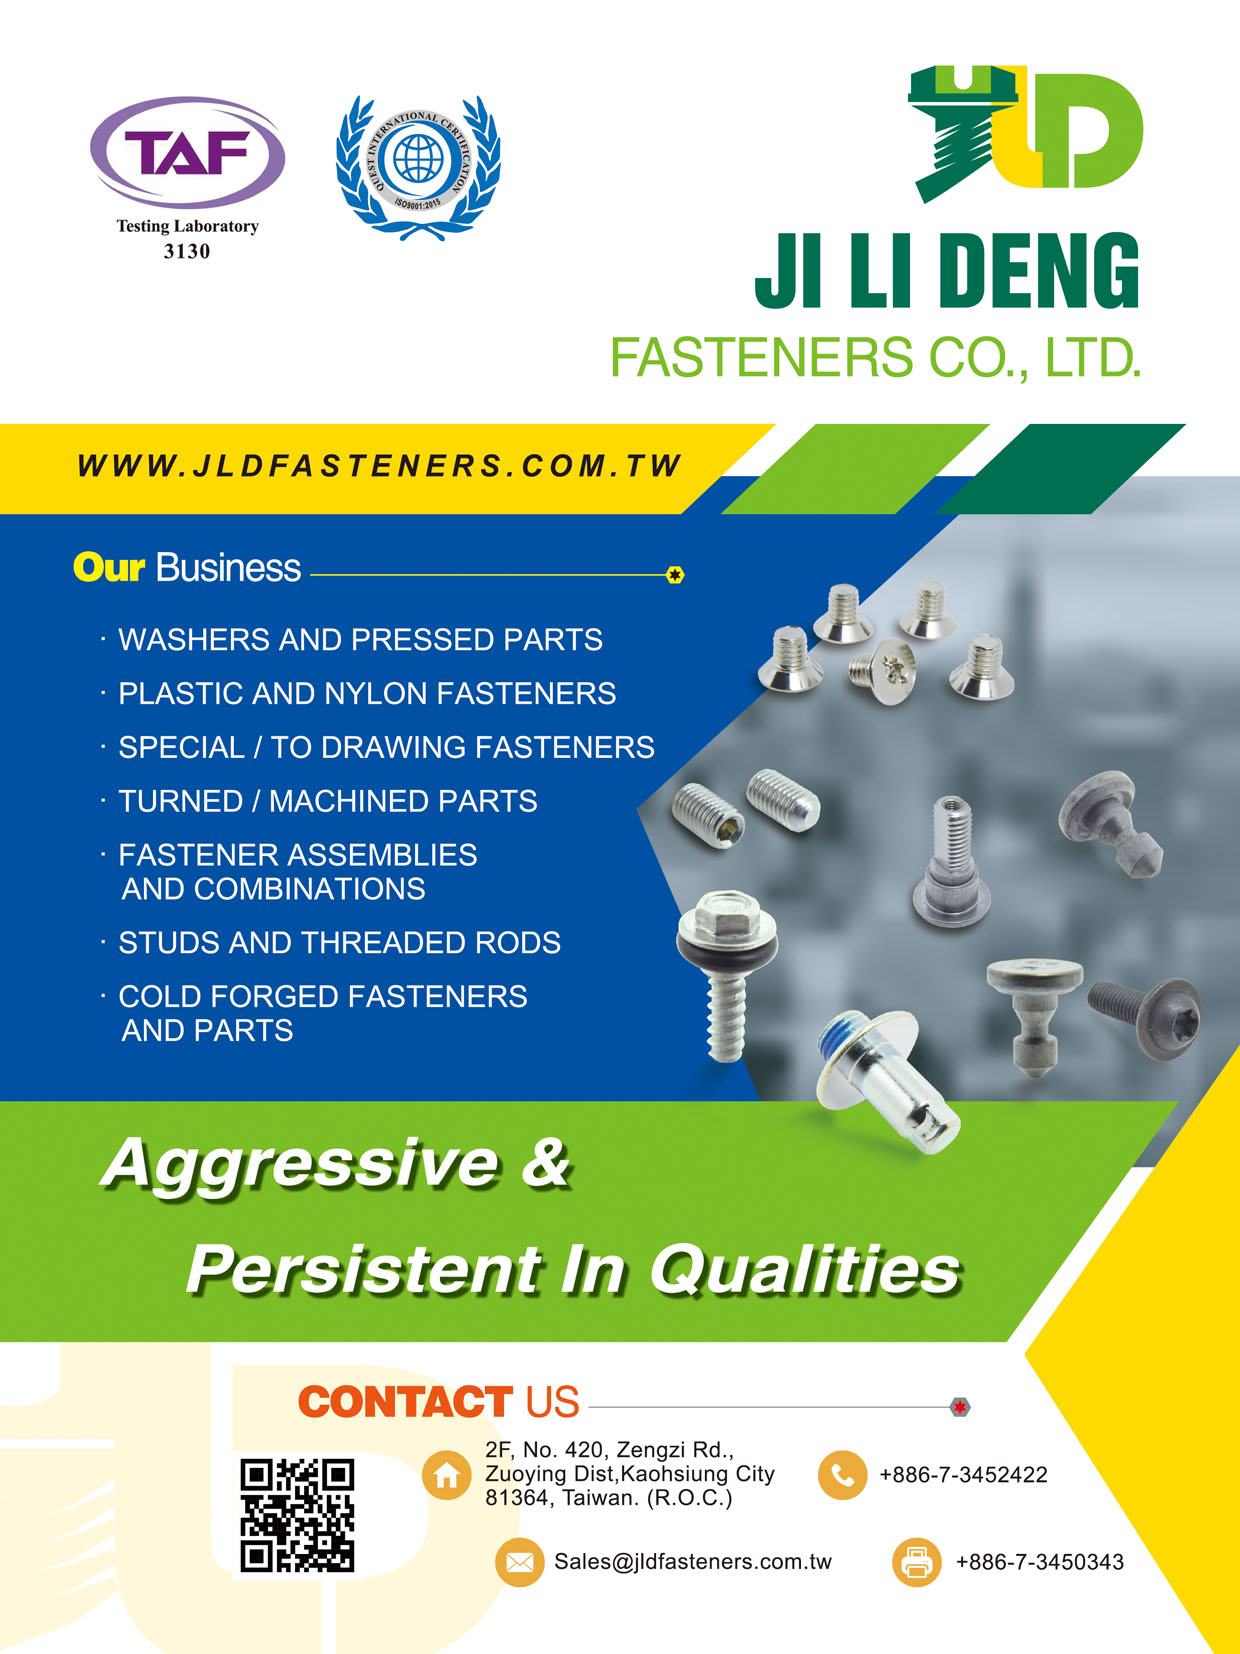 JI LI DENG FASTENERS CO., LTD. , WASHERS AND PRESSED PARTS, PLASTIC AND NYLON FASTENERS, SPECIAL / TO DRAWING FASTENERS, TURNED / MACHINED PARTS, FASTENER ASSEMBLIES AND COMBINATIONS, STUDS AND THREADED RODS, COLD FORGED FASTENERS AND PARTS , SEMS Screws